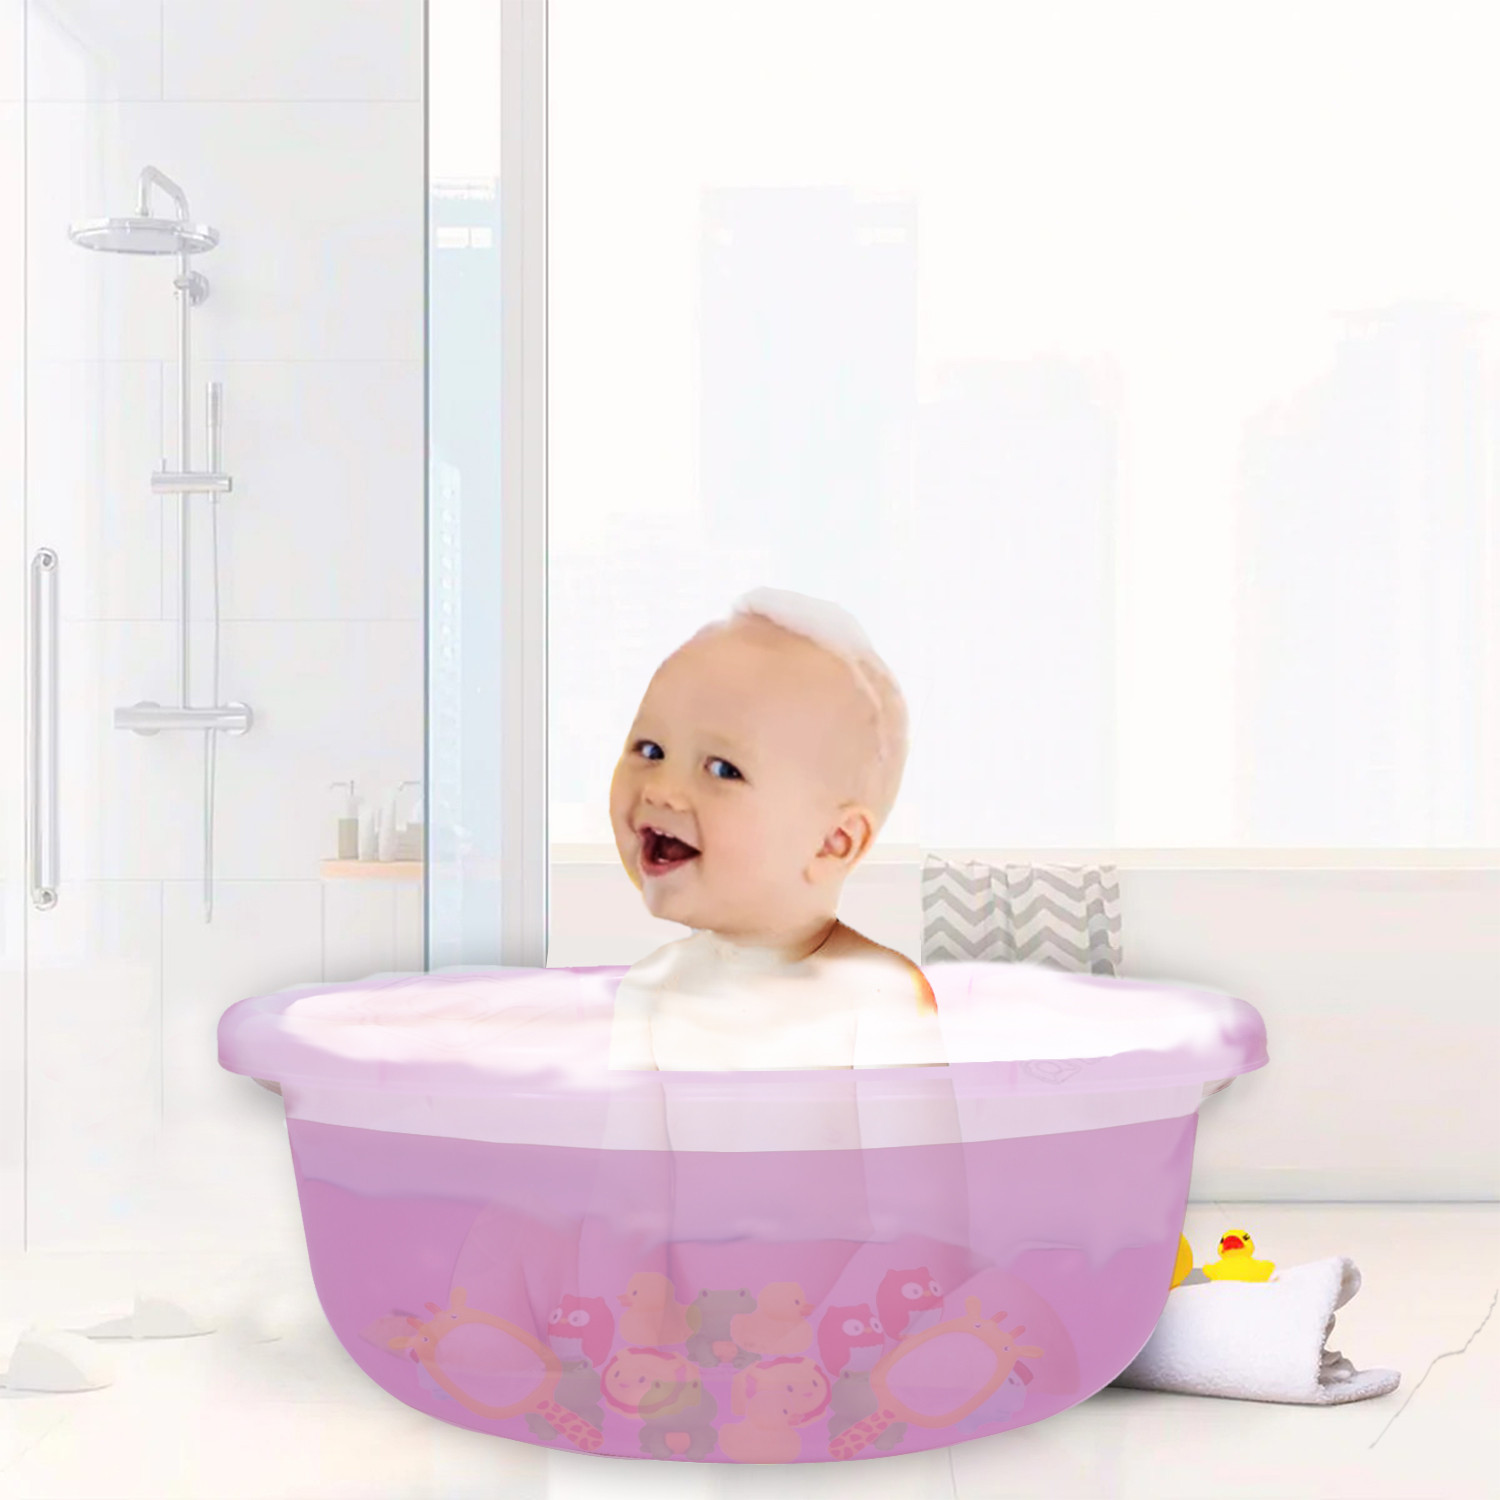 Kuber Industries Durable Deep Bath Tub|Versatile Short Livestock Feeding Pan|Unbreakable Plastic Utility Gaint Basin for Baby Bathing,Washing Clothes,26 Litre,Pack of 2 (Black & Pink)